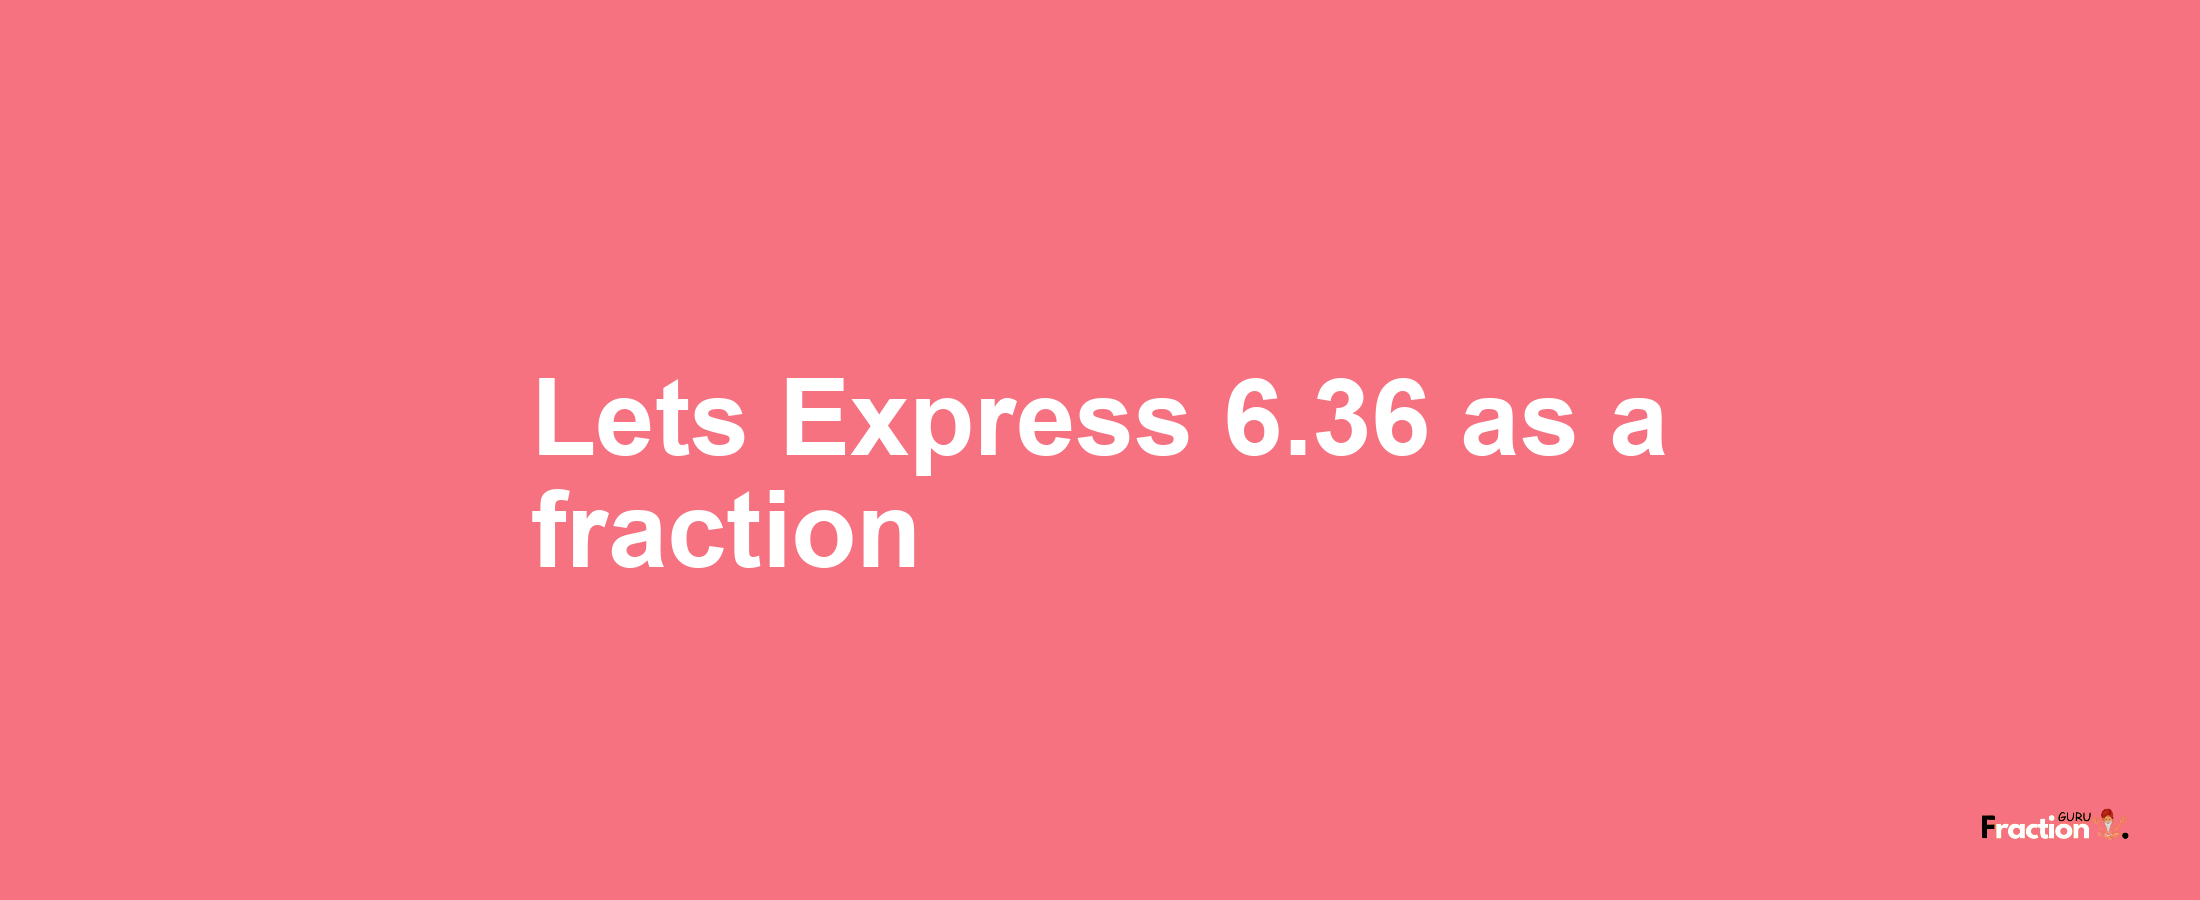 Lets Express 6.36 as afraction